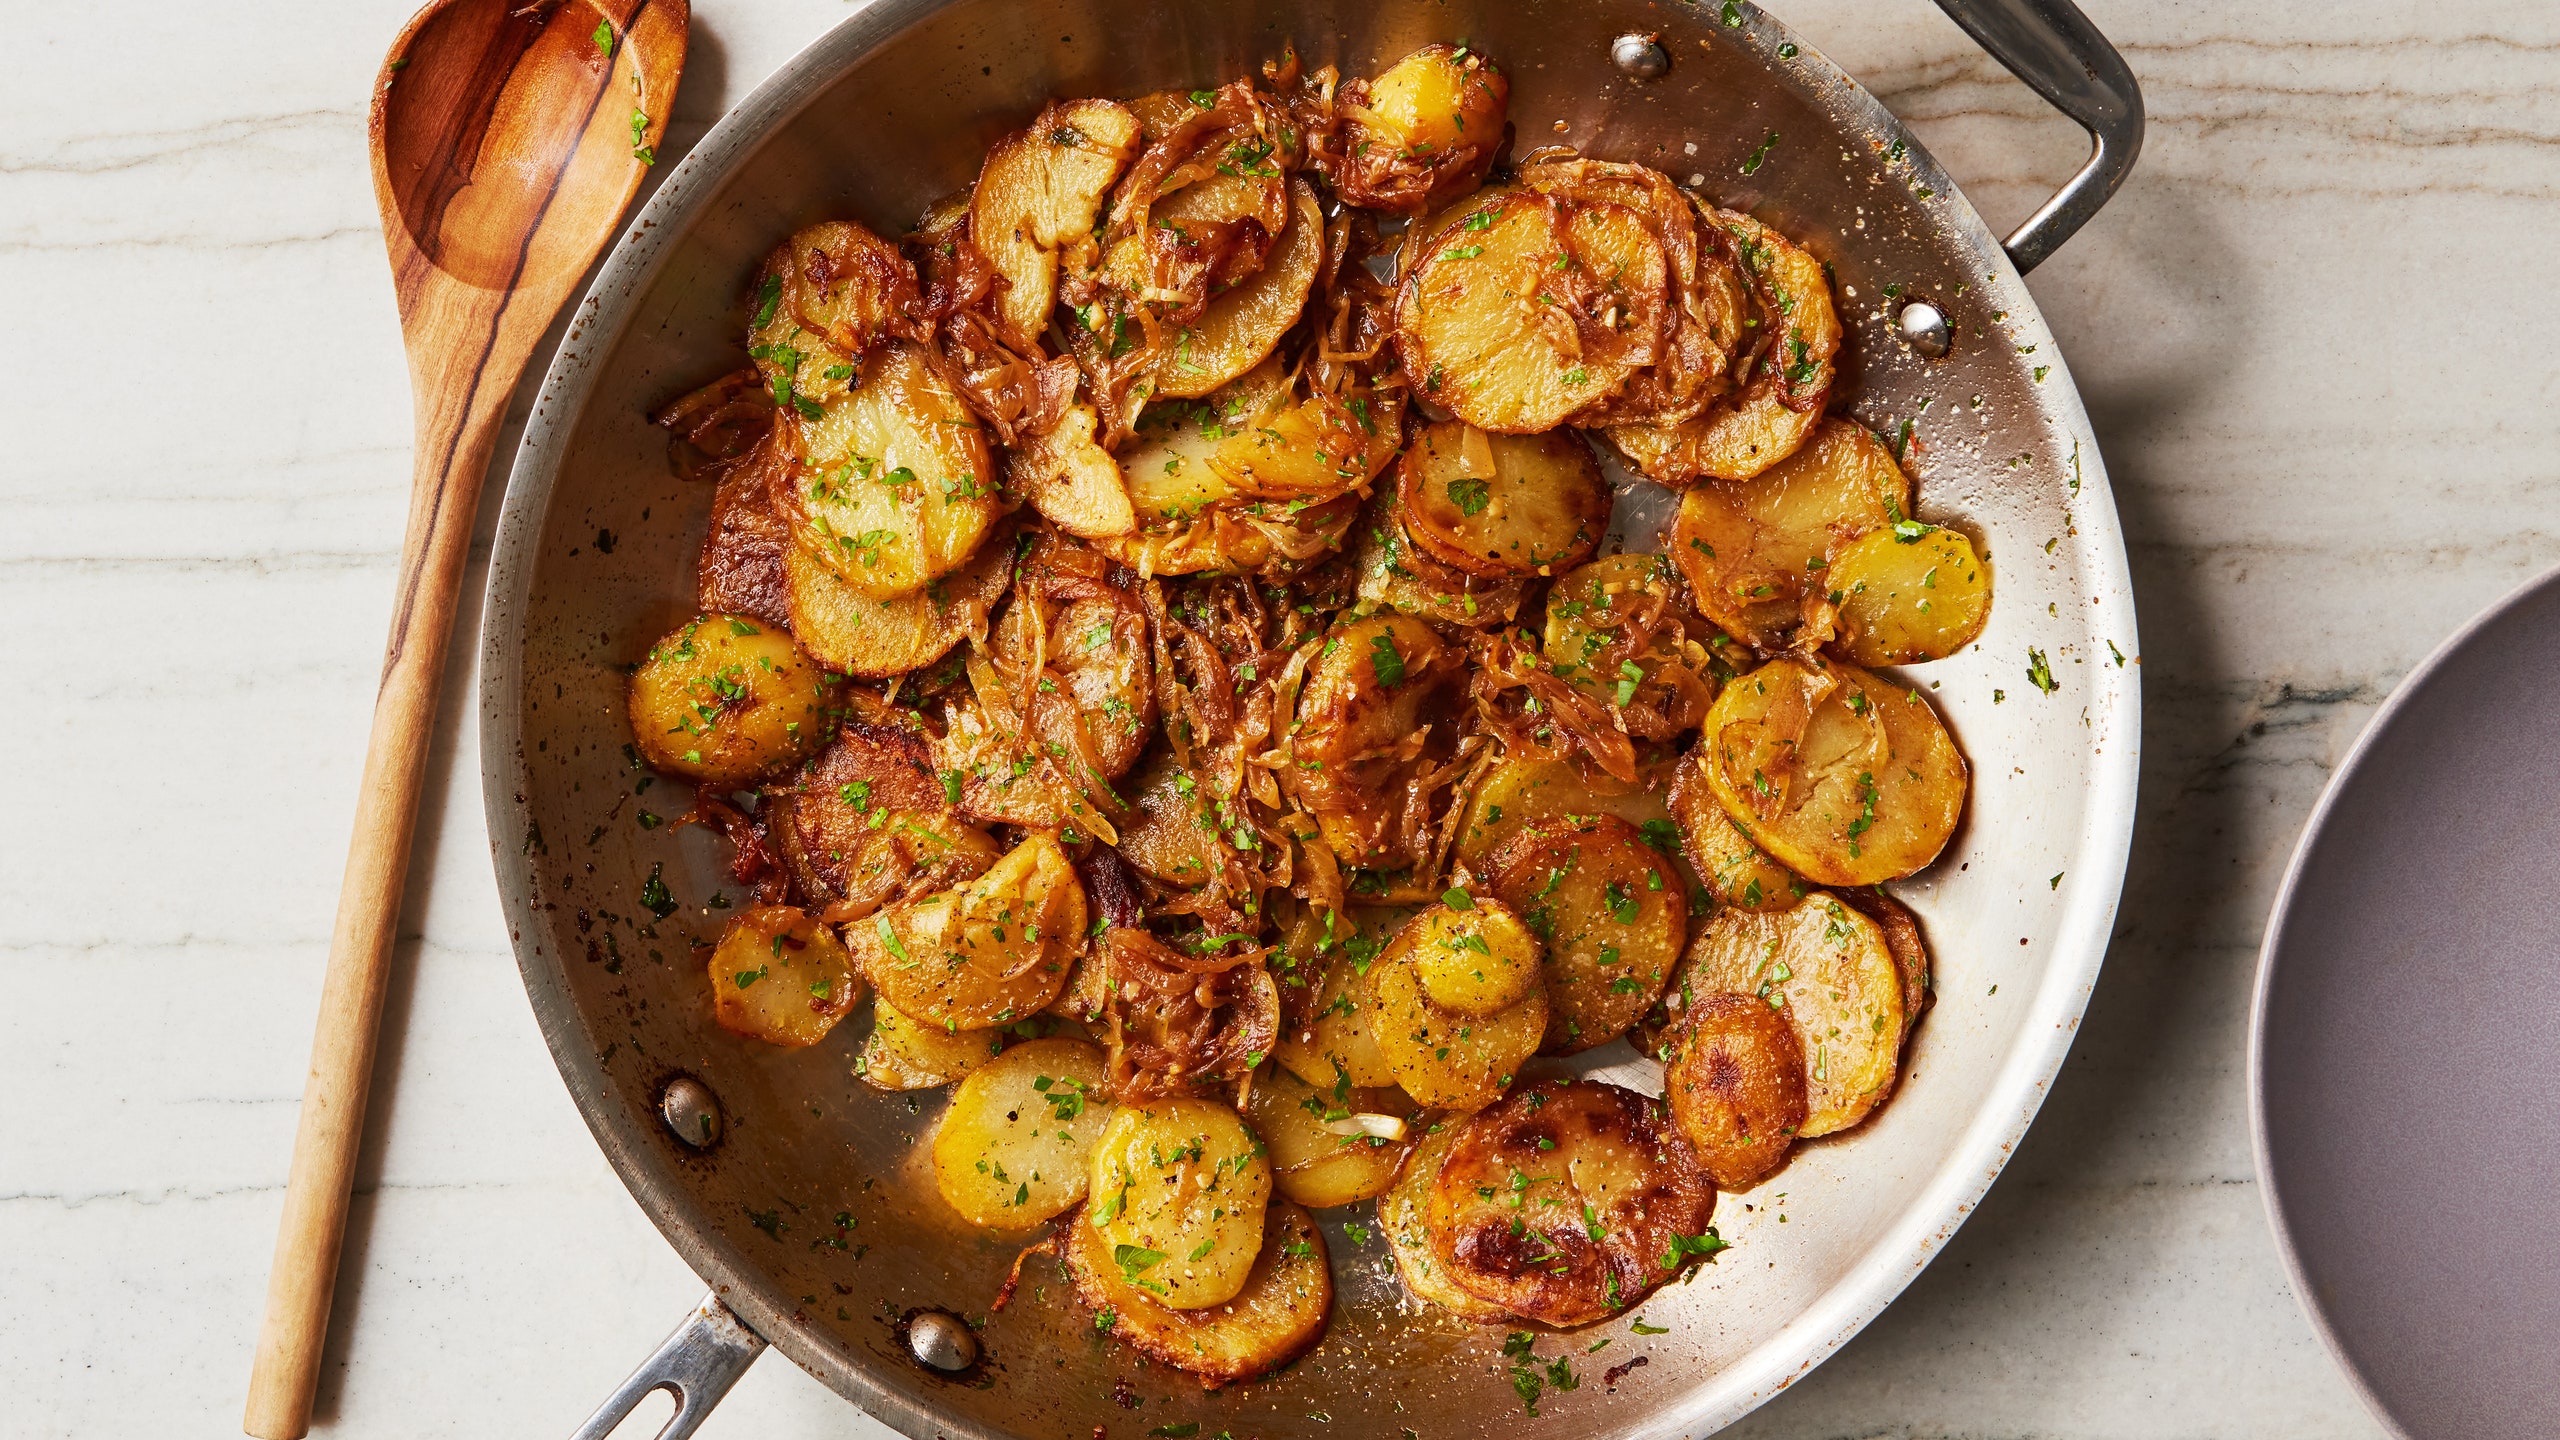 Sliced potatoes in a pan with caramelized onions and fresh parsley.